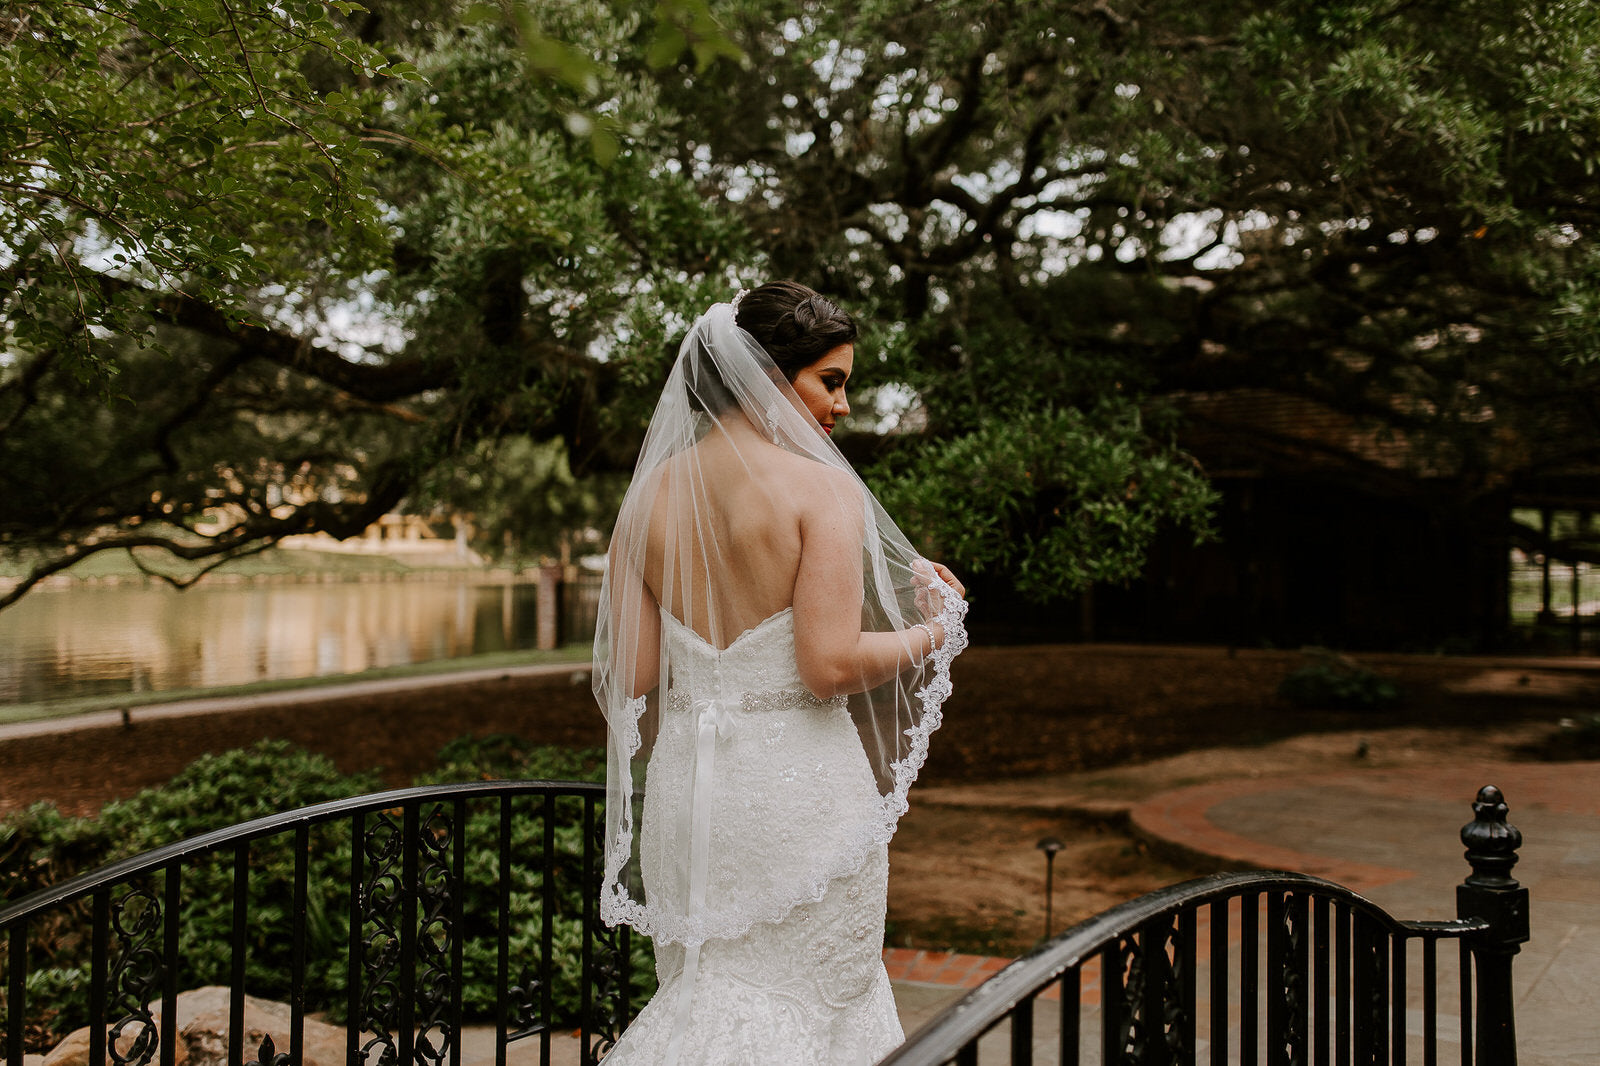 Load video: bride wearing strapless wedding dress with semi lace medium length wedding veil as she walks with her groom around her garden venue